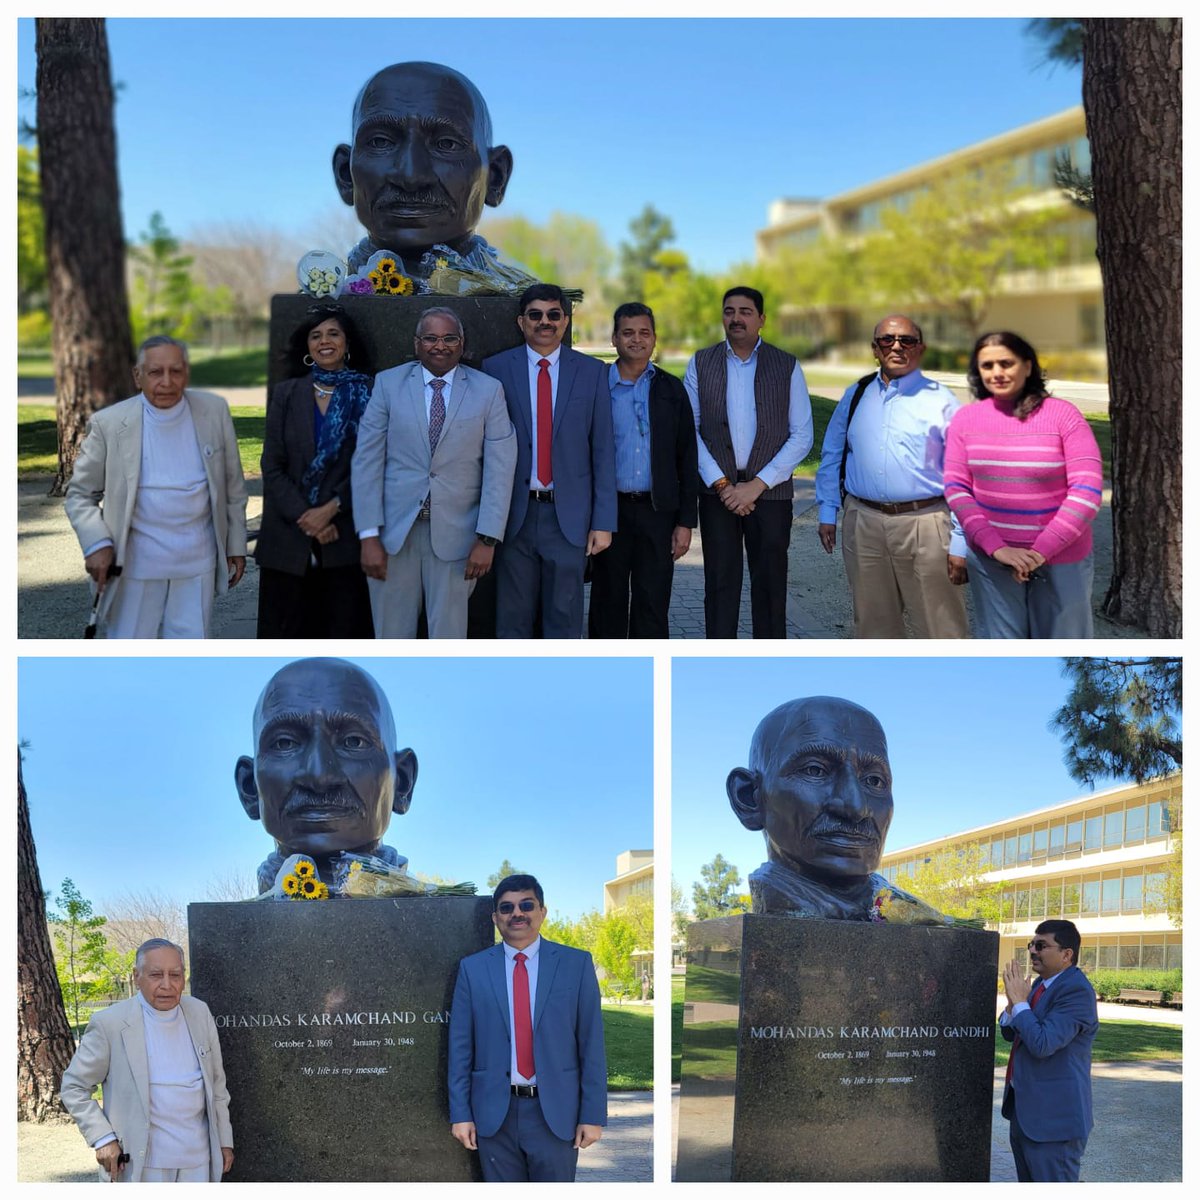 Consul General Dr. K. Srikar Reddy's paid floral tributes at the bust of Mahatma Gandhi in Peace Garden at Fresno State Univeristy [FSU] yesterday. He also met with members of Indian faculty Dr.Sudharshan Kapoor, Dean Ram Nunna, Dr.Veena Howard, and Dr. Srini Konduru, and held…